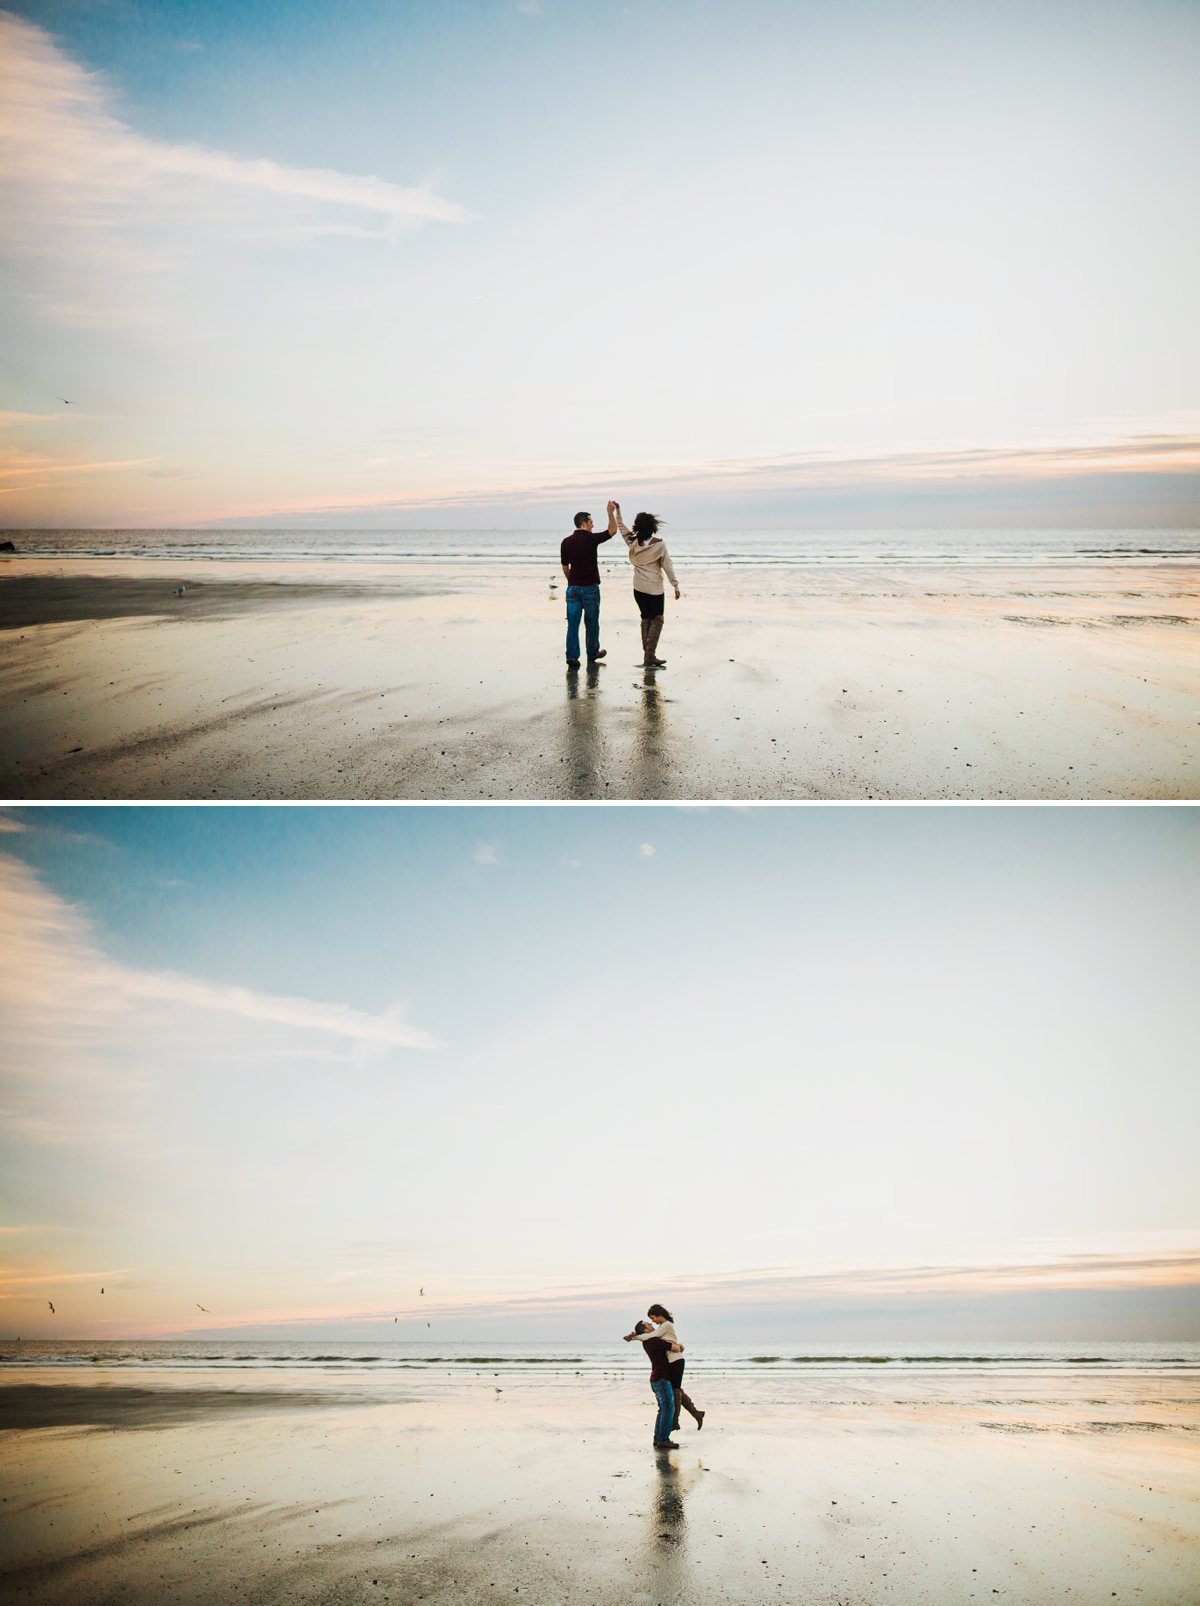 Couples photo session on the beach | Izzy Hudgins Photography